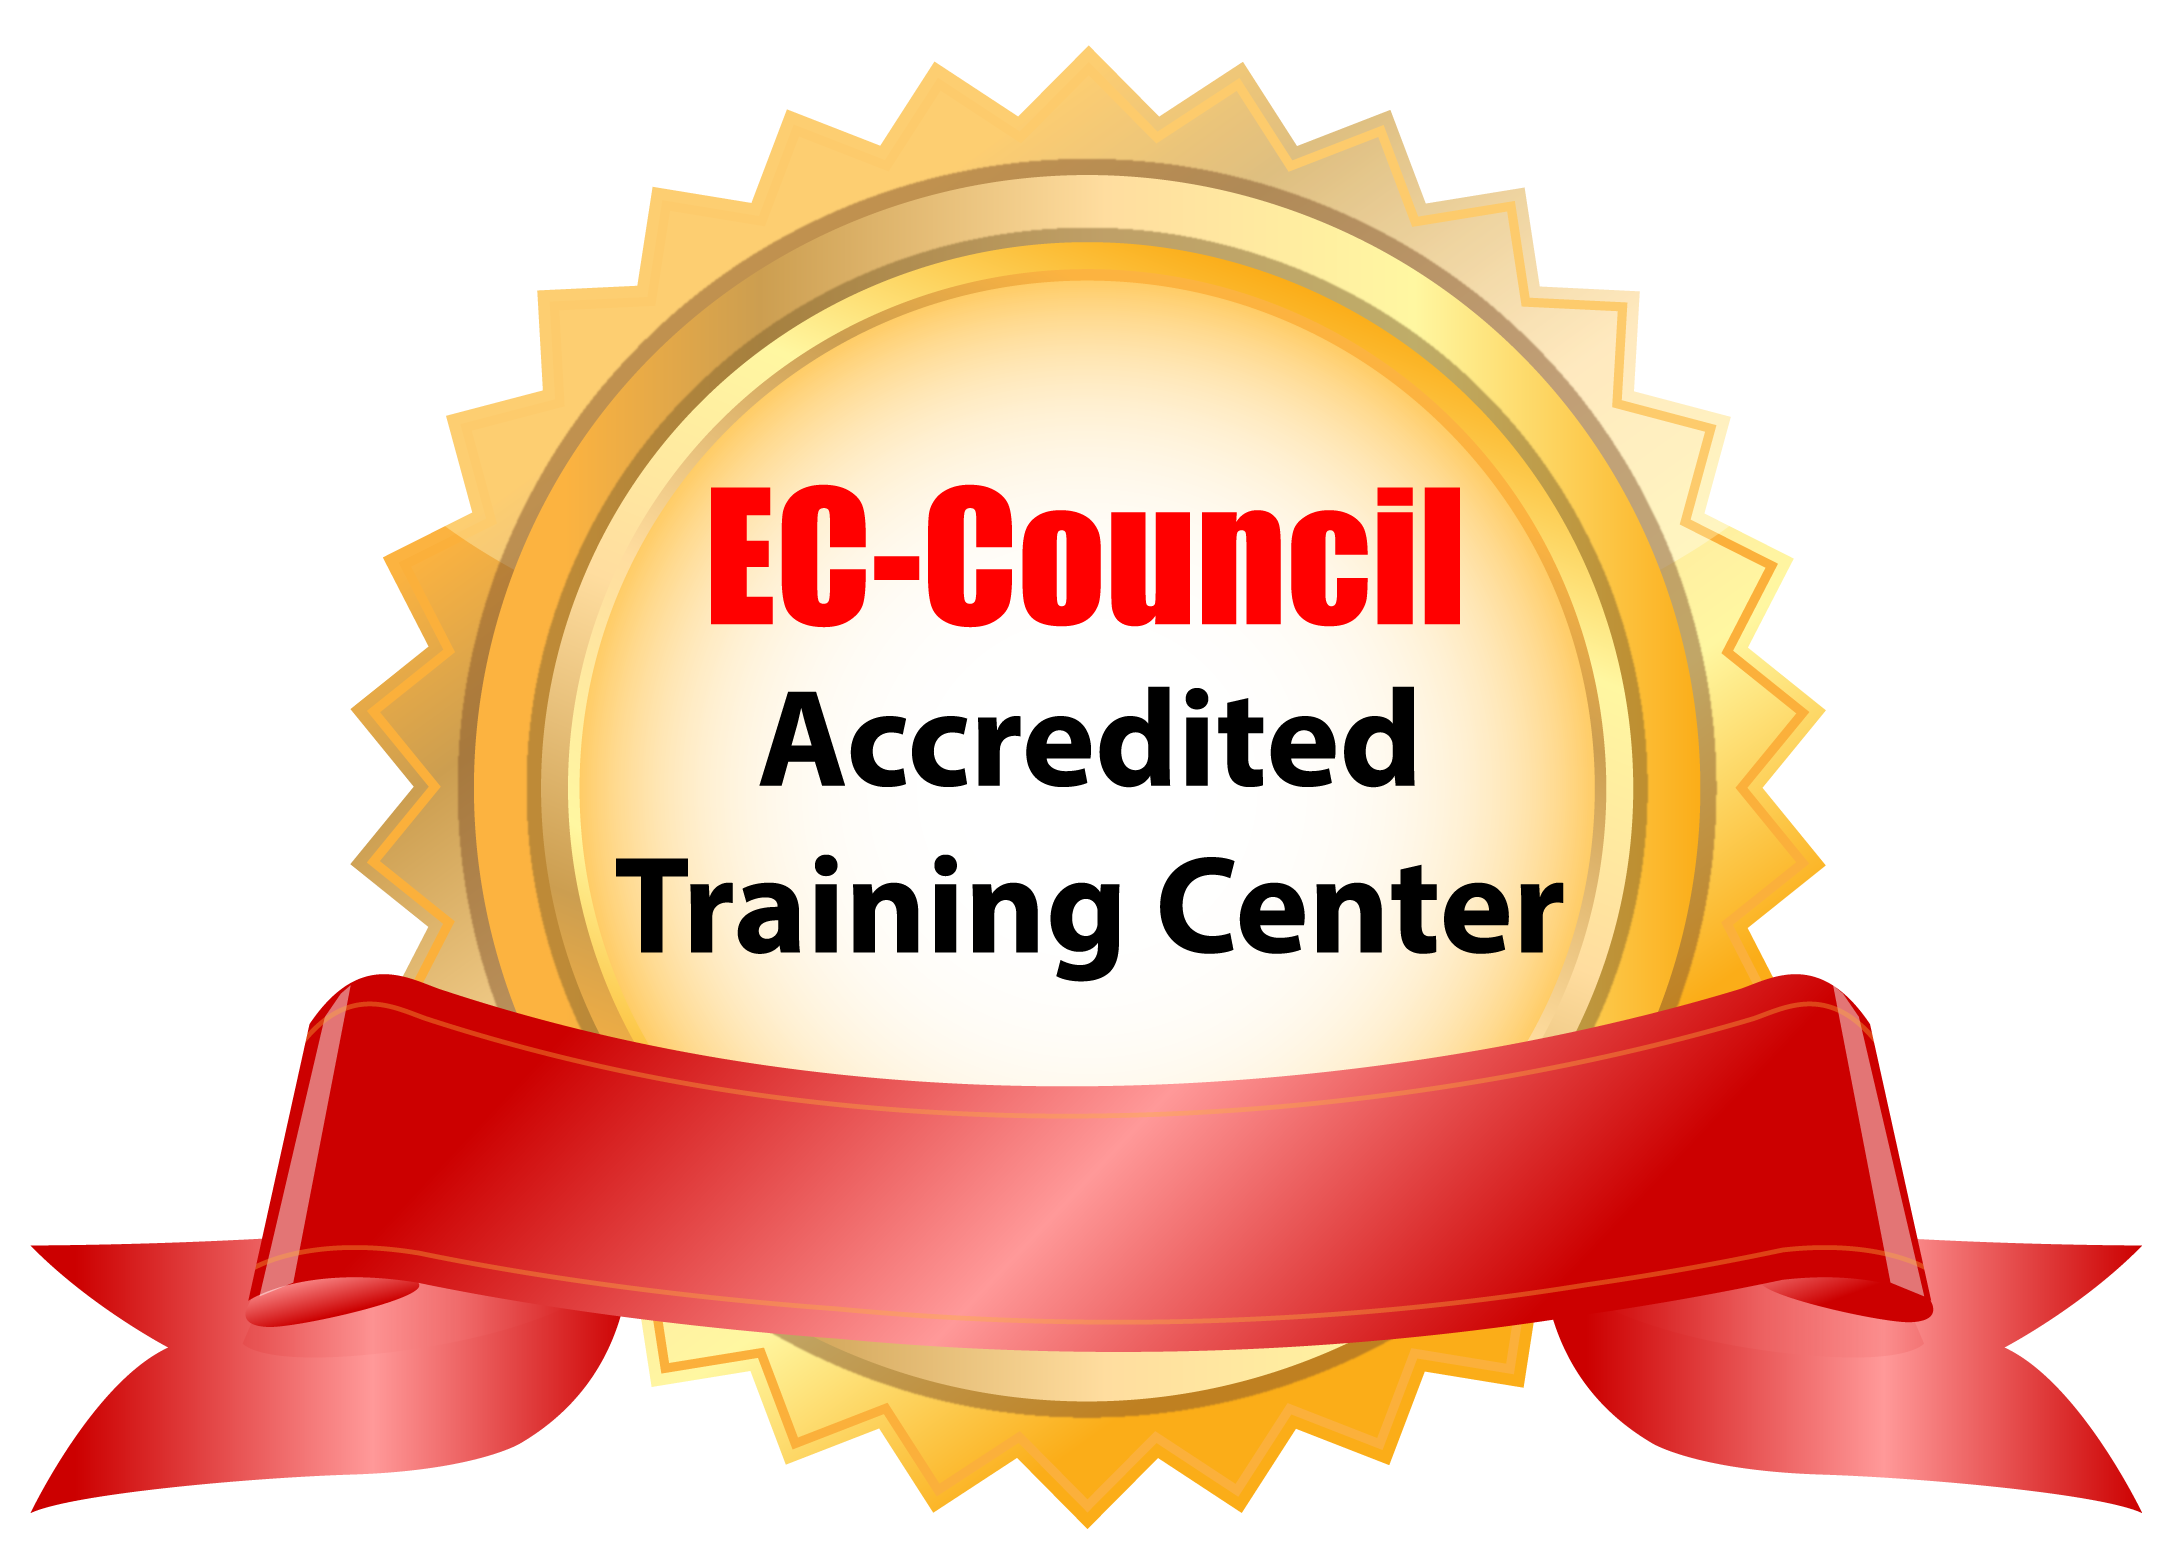 EC-Council Disaster Recovery Professional (EDRP)